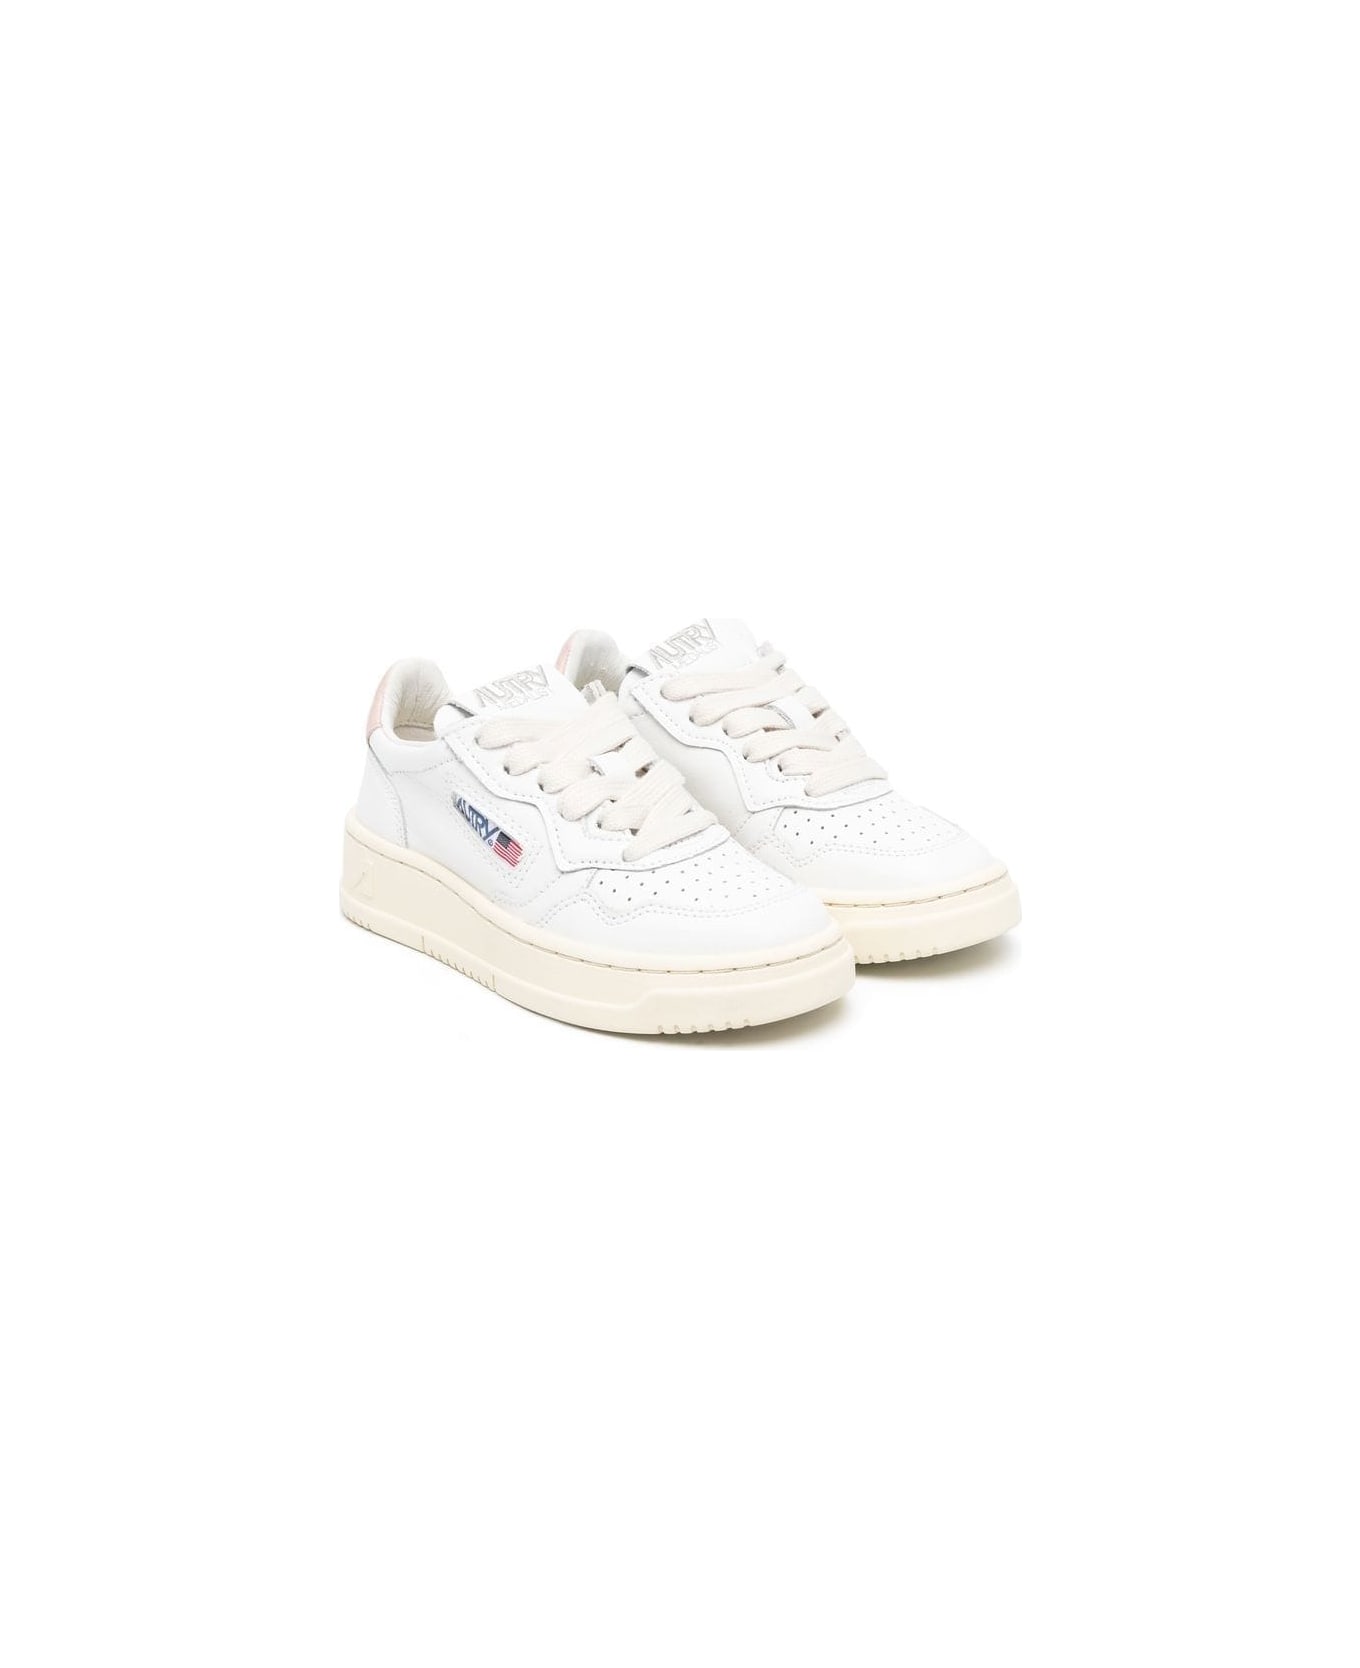 Autry Kids Medalist Low Sneakers - White シューズ